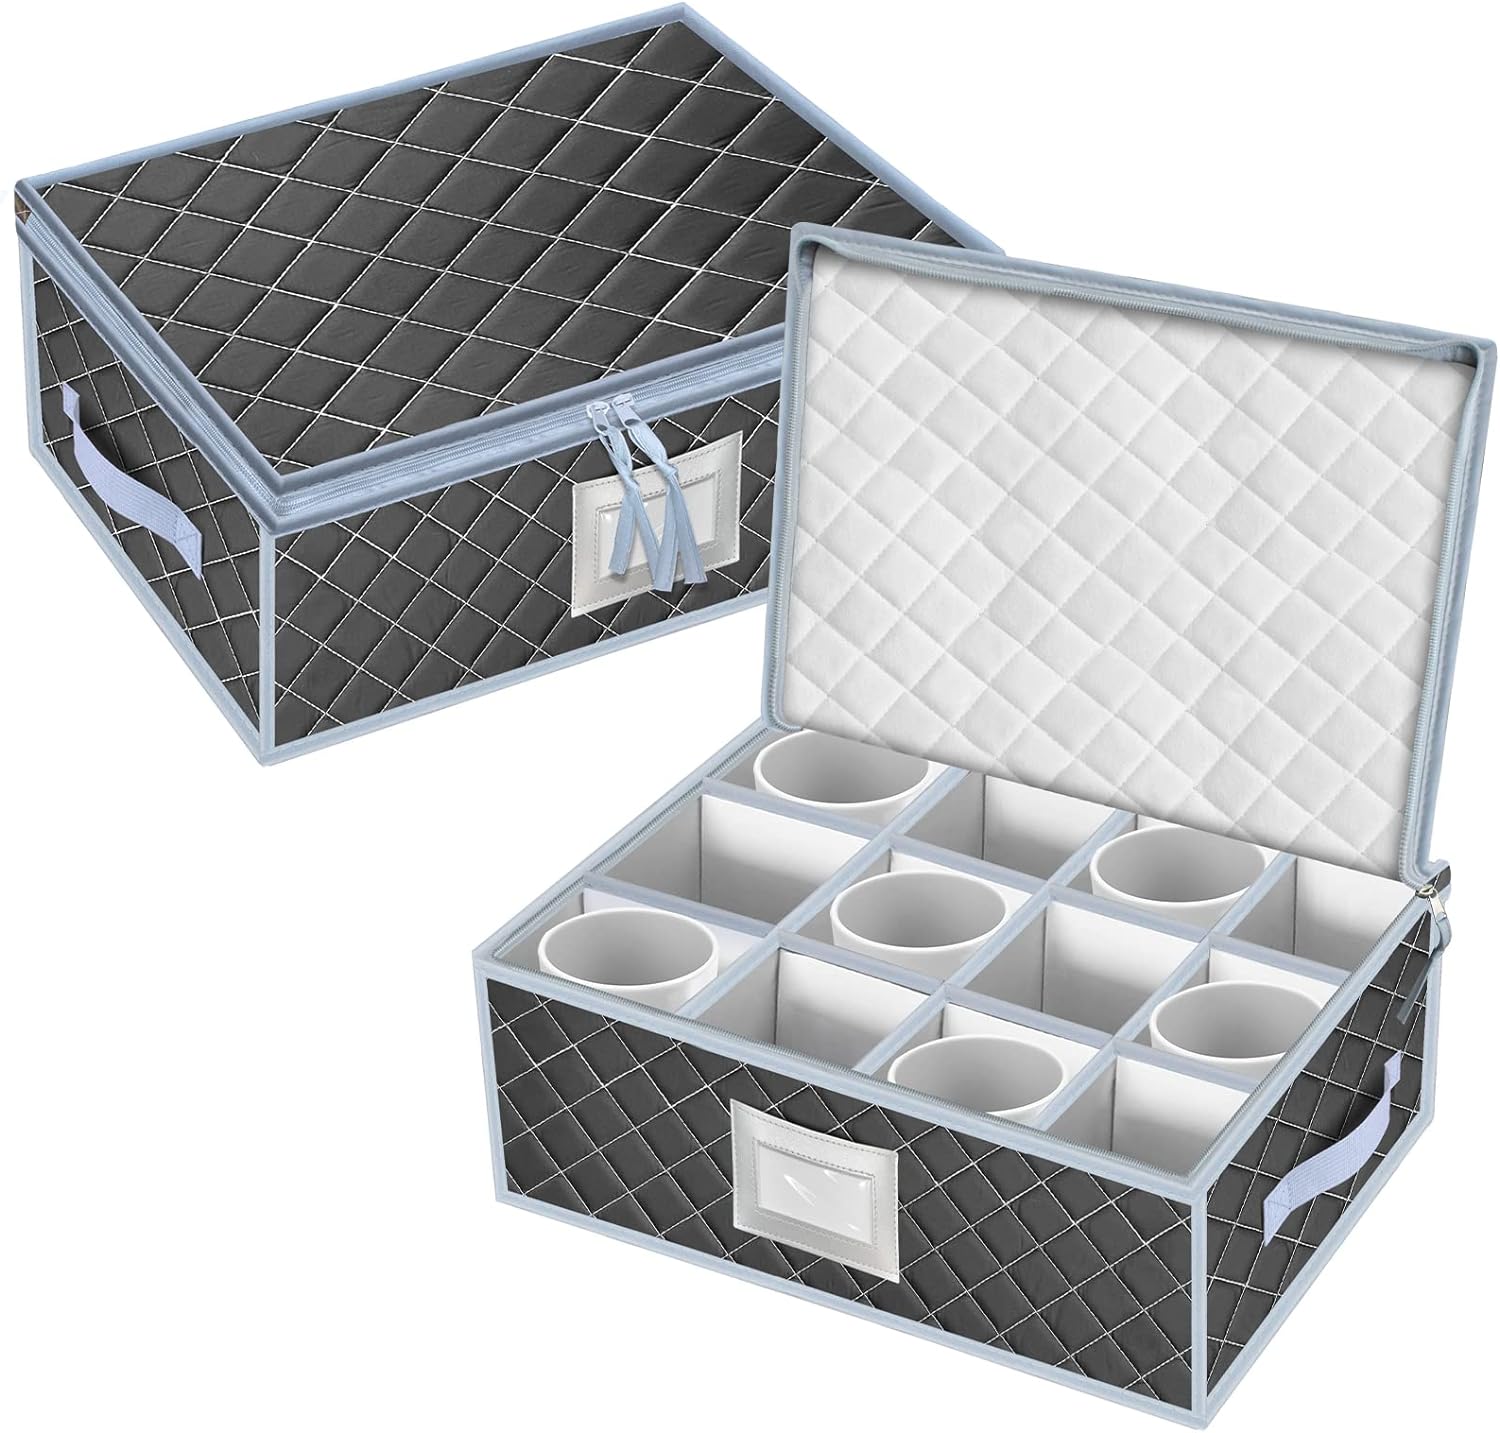 VERONLY Mug and Cup Storage Box with Dividers - 2 Pack China Storage Containers Holds 24 Glassware, Stackable Coffee Mug Organizer Bin and Tea Cup with 2 Metal Zipper,Label and Handles (Grey)